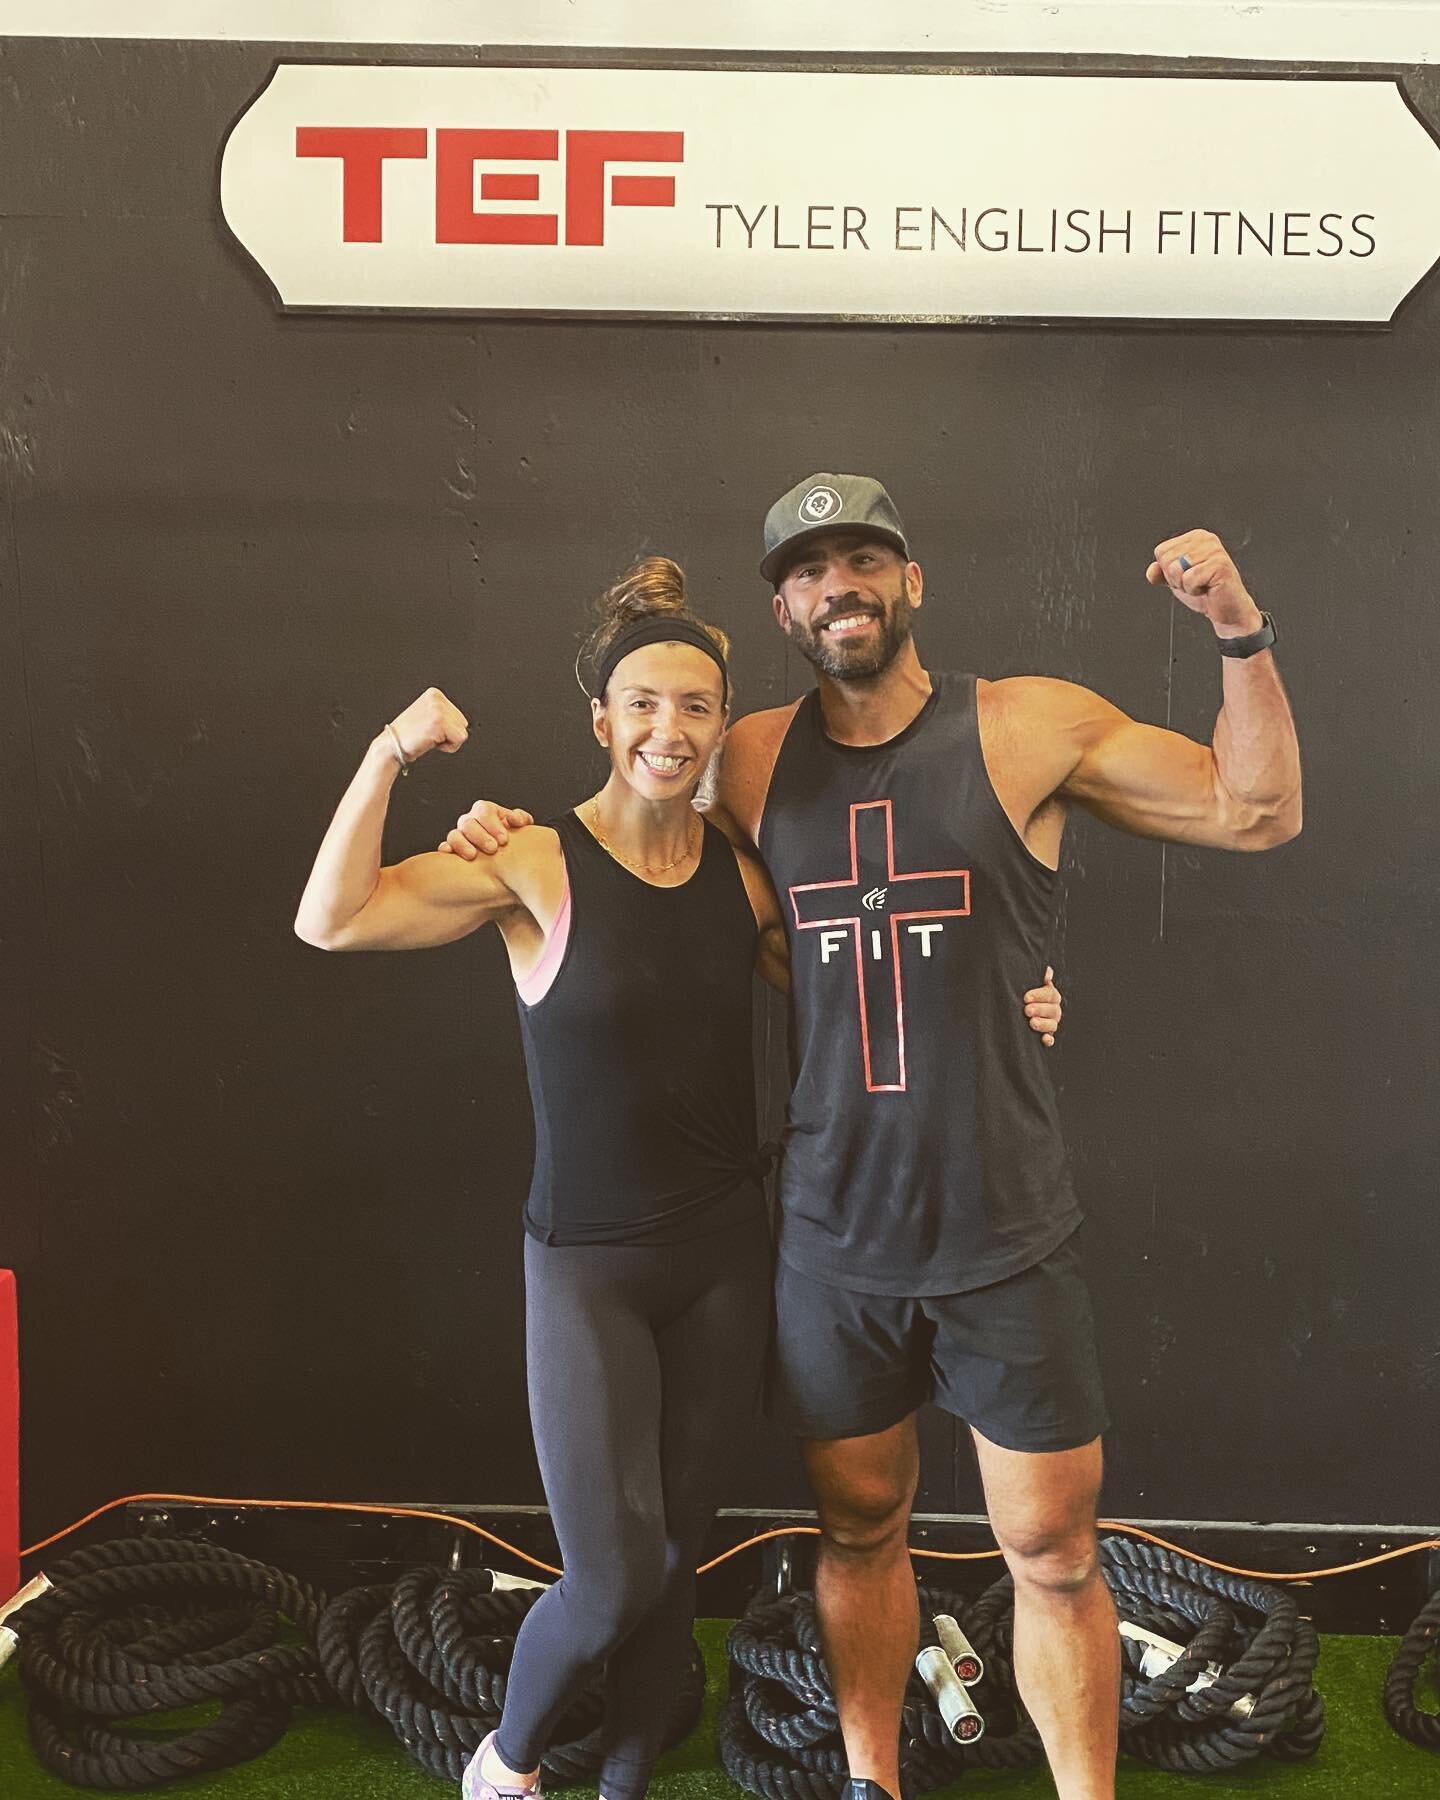 It&rsquo;s been a great week of spontaneous programming of strength and conditioning at @tylerenglishfitness! 💪🏼 If you&rsquo;re in the Simsbury/Avon/Canton area of Connecticut&hellip;come check them out&hellip;you won&rsquo;t be disappointed! 👌🏼